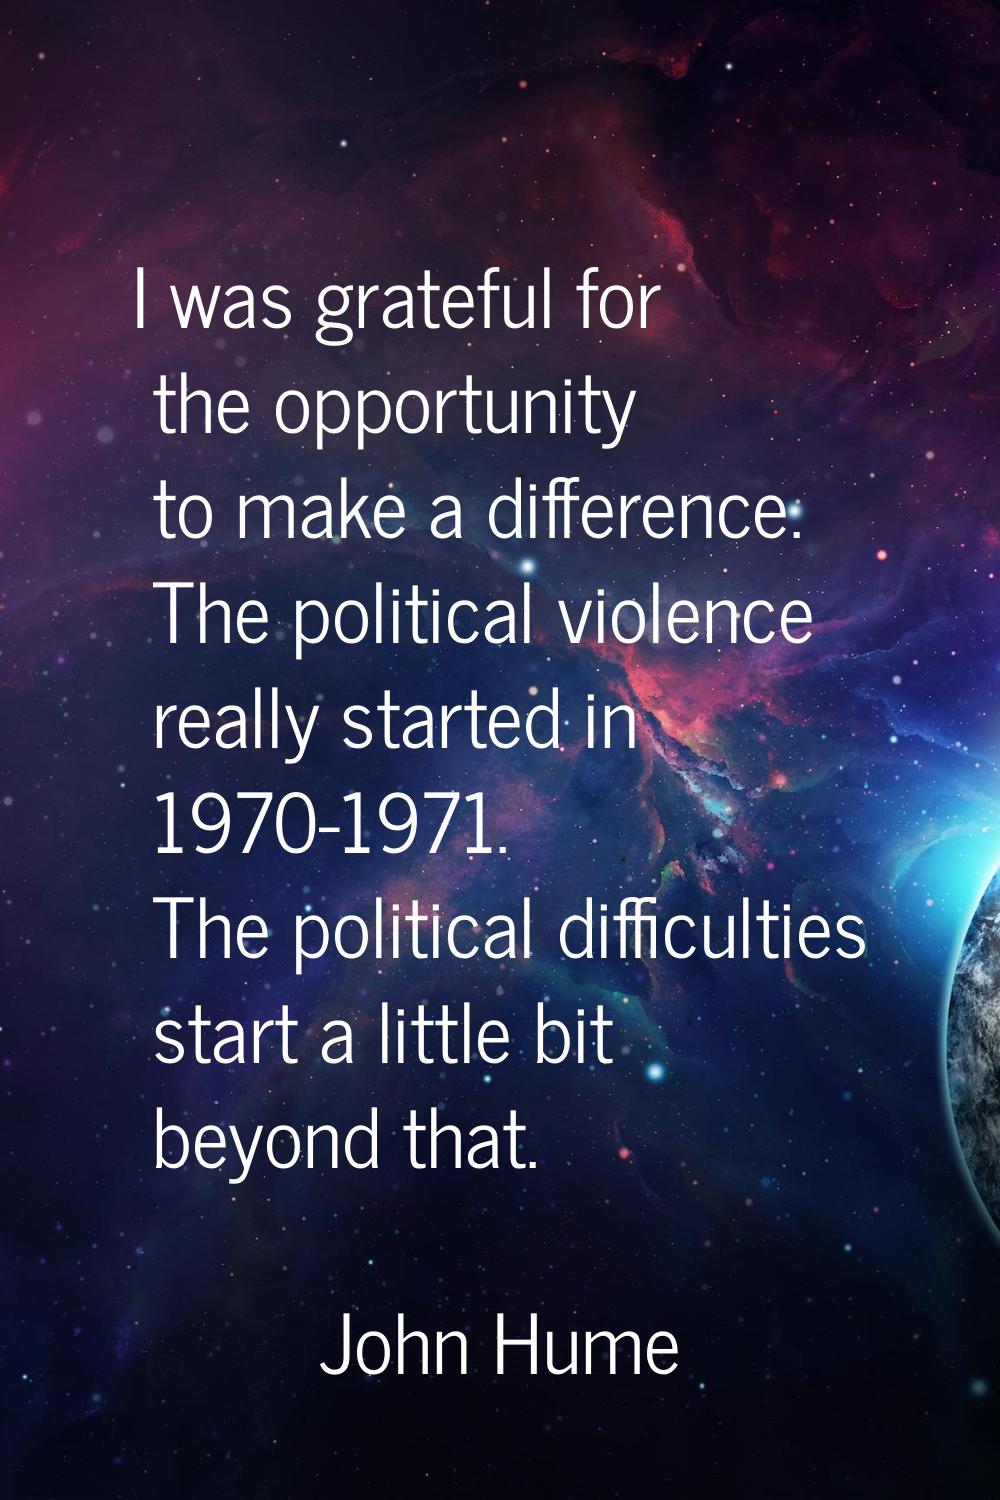 I was grateful for the opportunity to make a difference. The political violence really started in 1